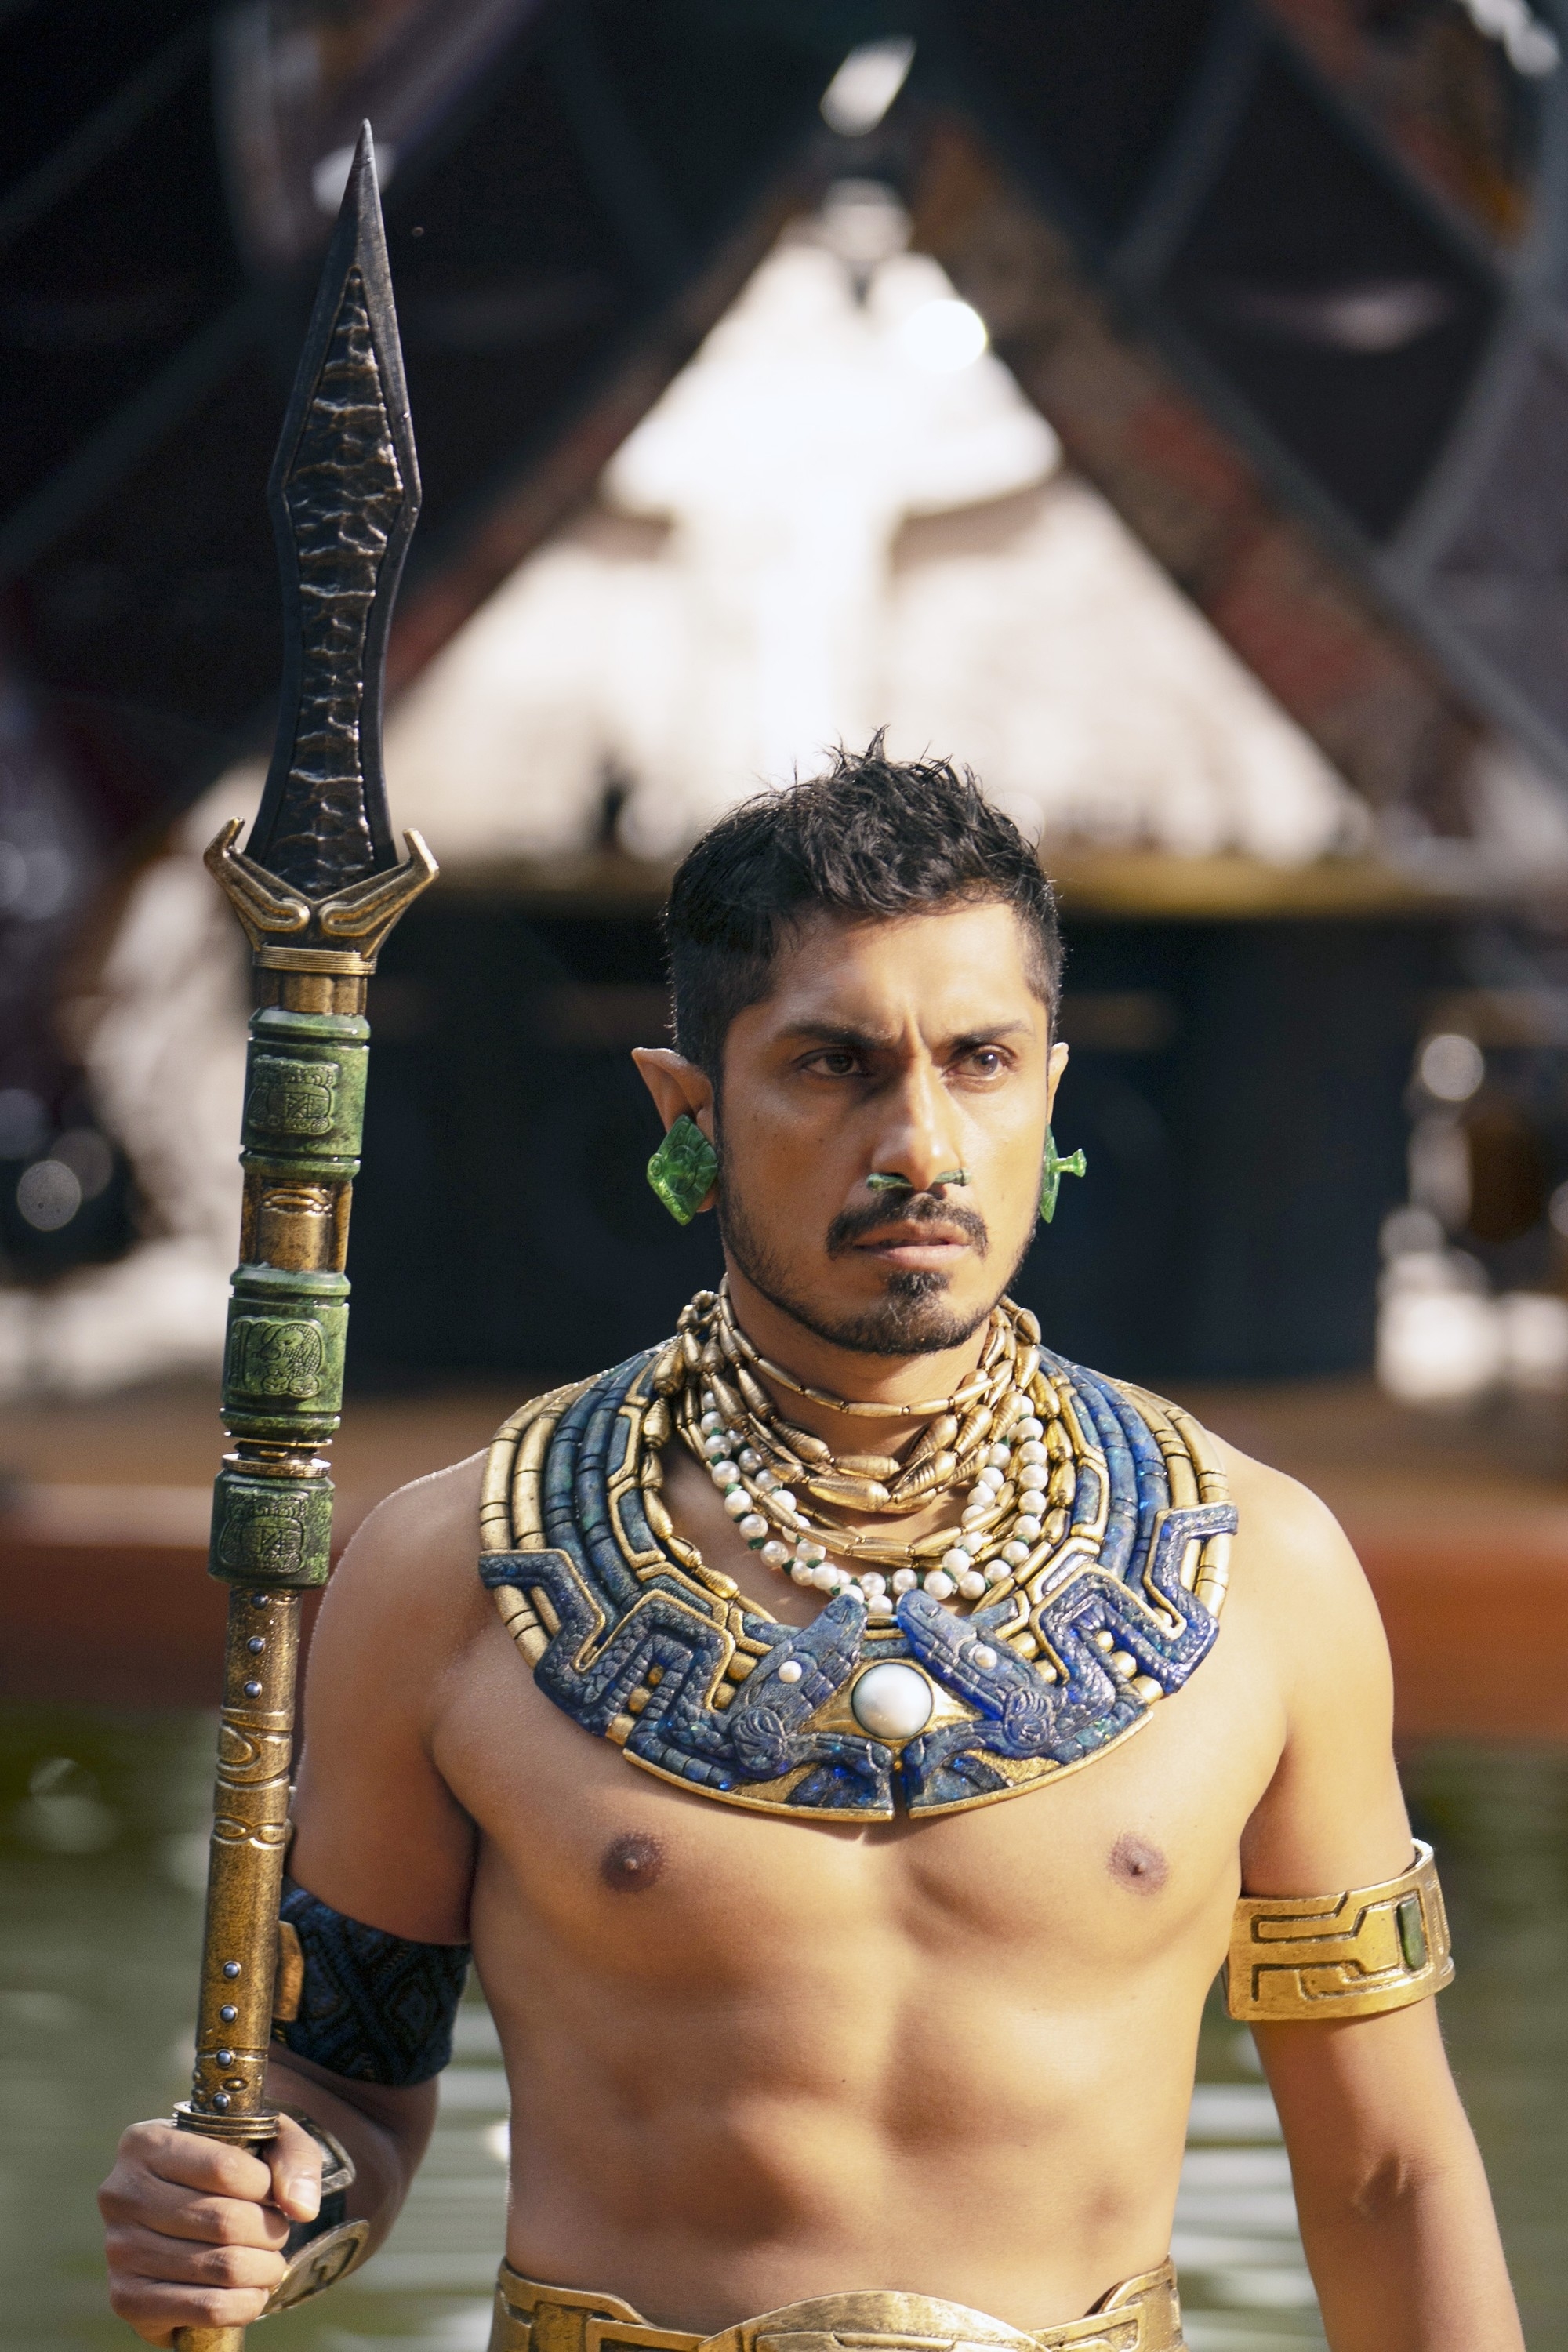 Tenoch Huerta, shirtless in a warrior role, holding a spear, wearing elaborate gold and turquoise accessories, looking intently ahead